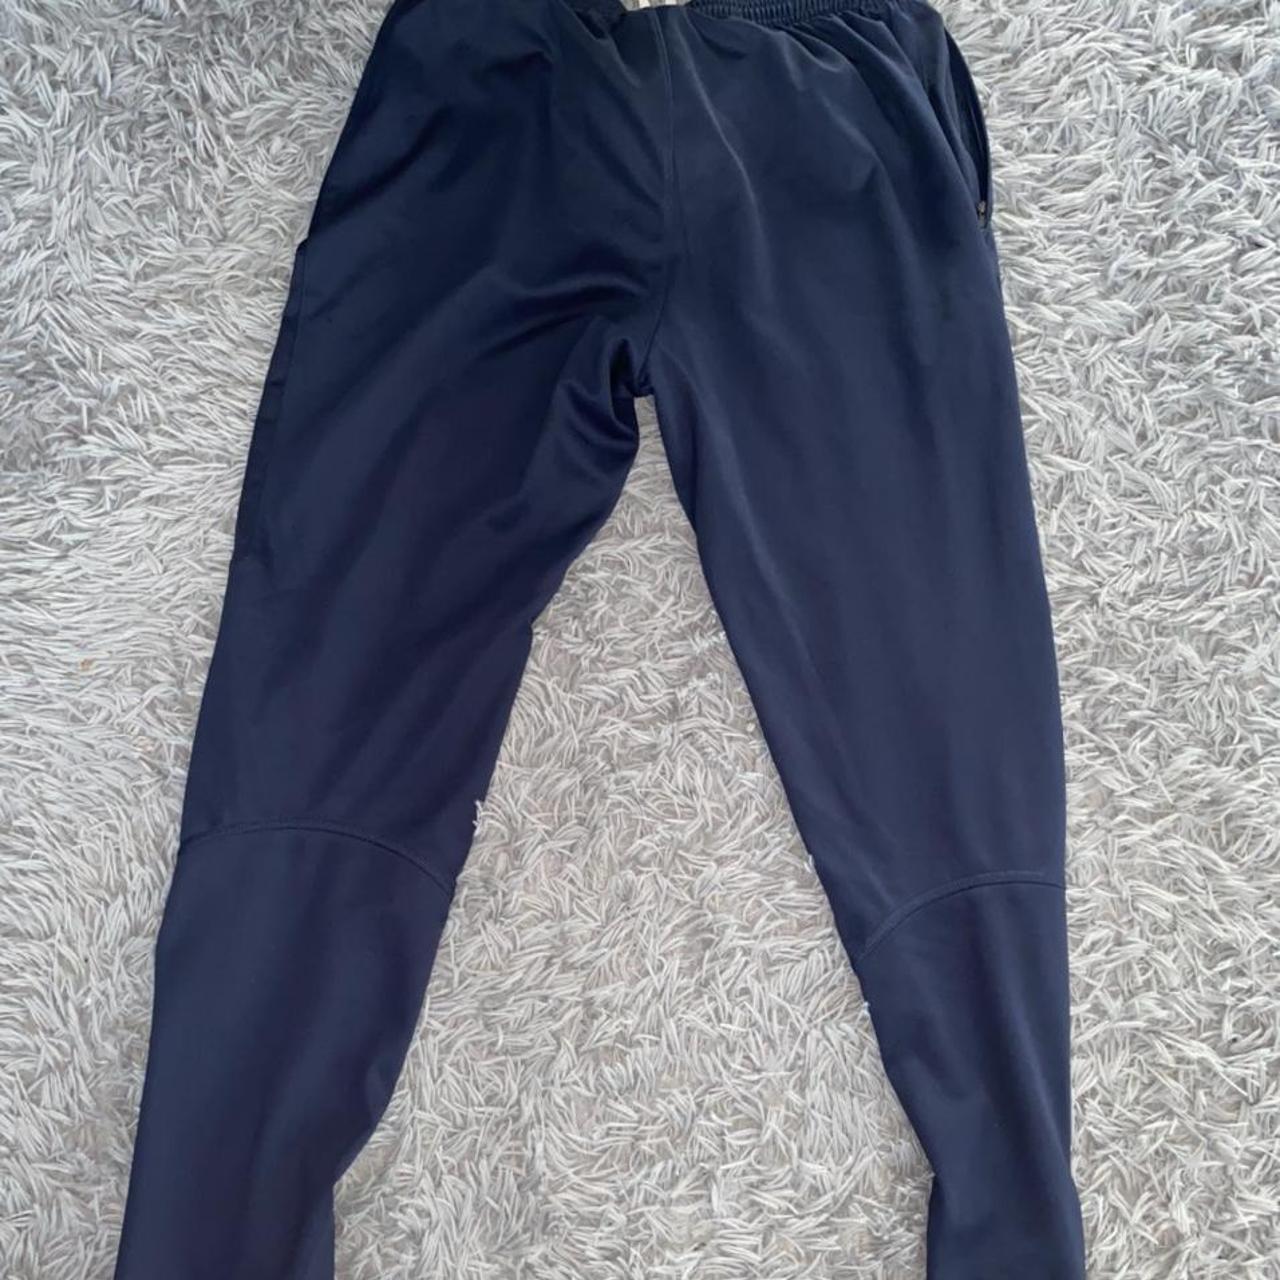 Nike Men's Blue and White Joggers-tracksuits | Depop